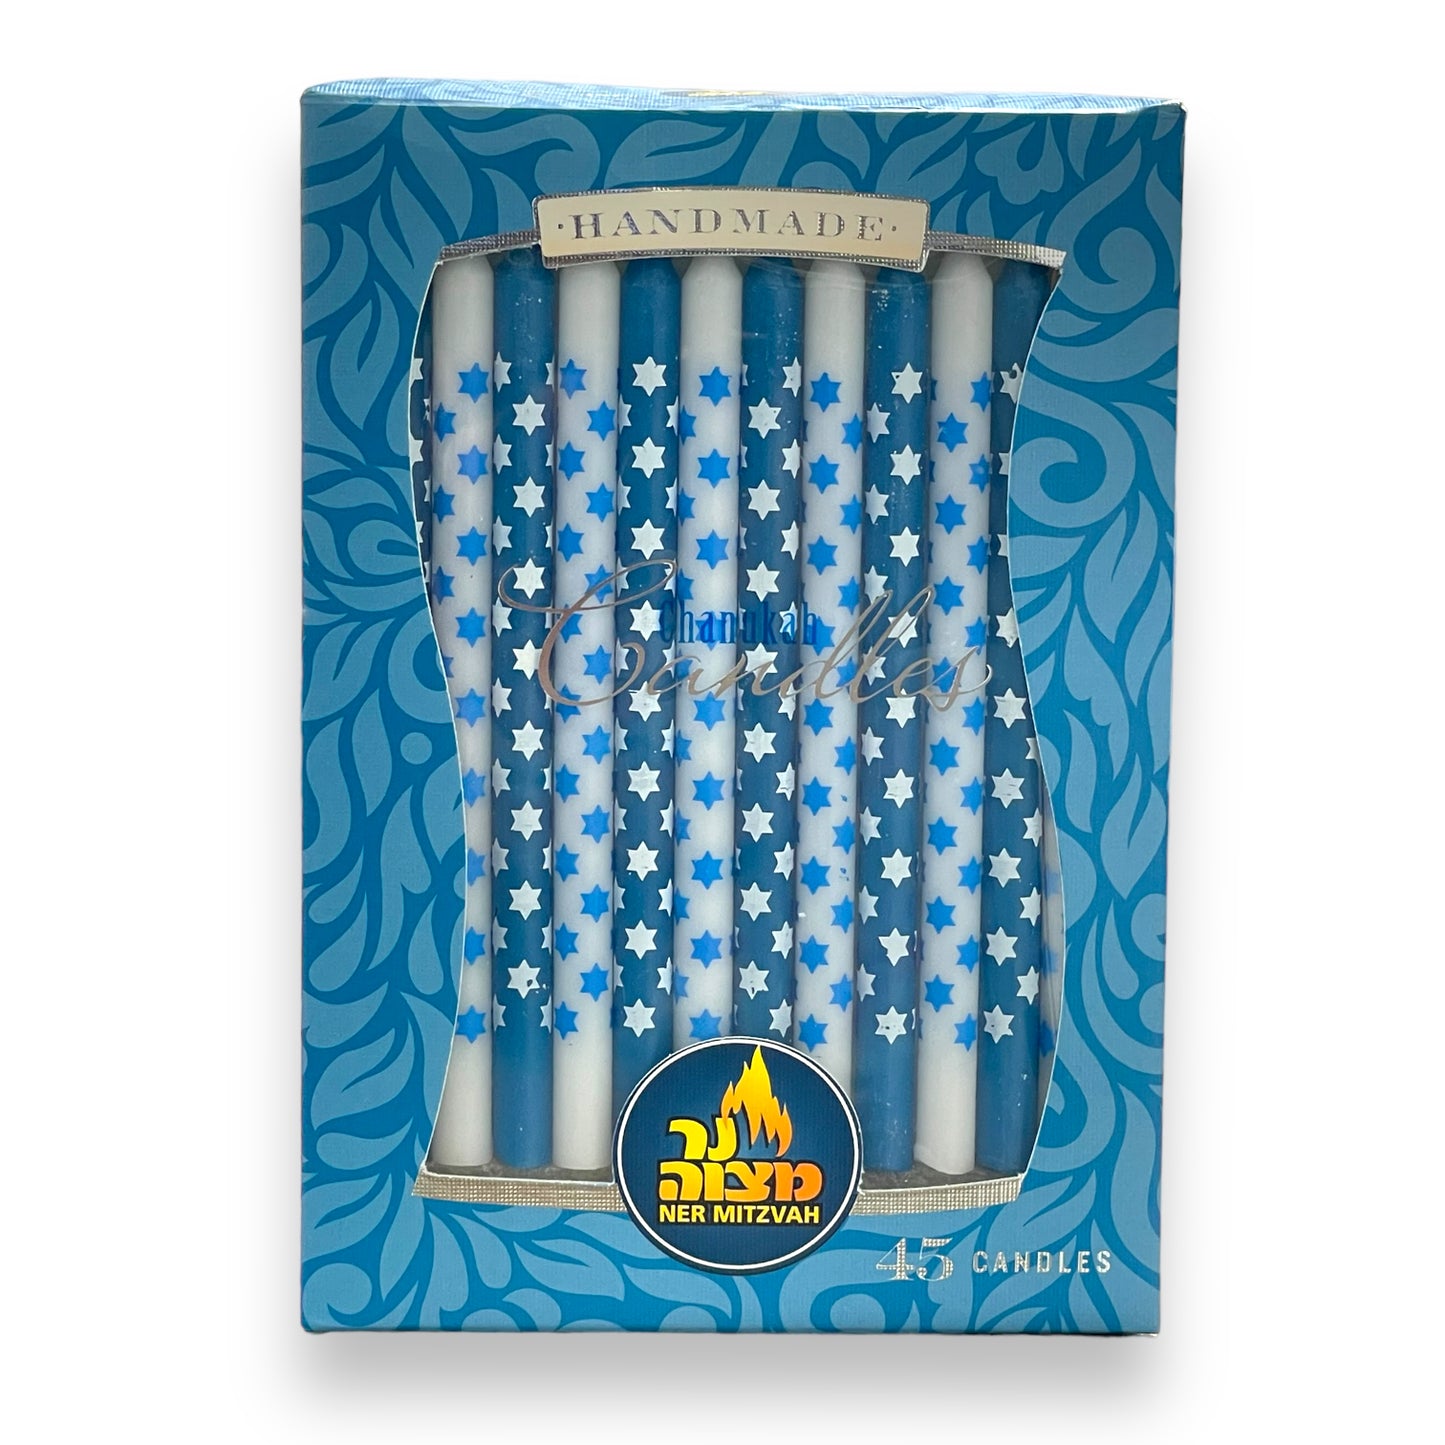 White and blue with stars Hanukkah Candles - 45 Pack 6"